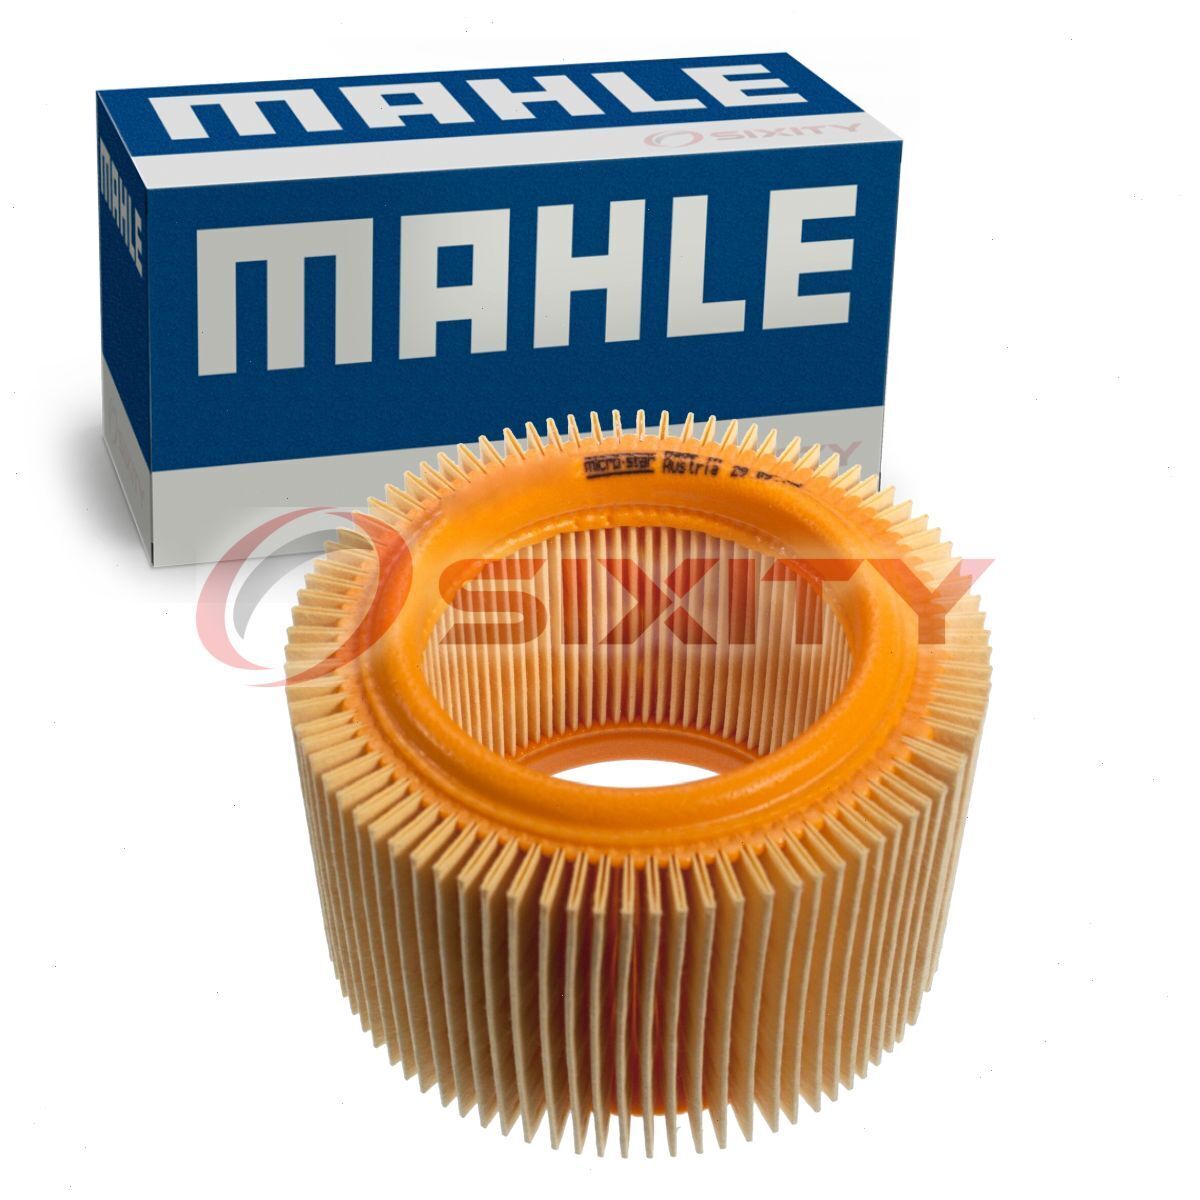 MAHLE Air Filter for 2000-2003 BMW R1200C Independent -- -L Intake Inlet kk